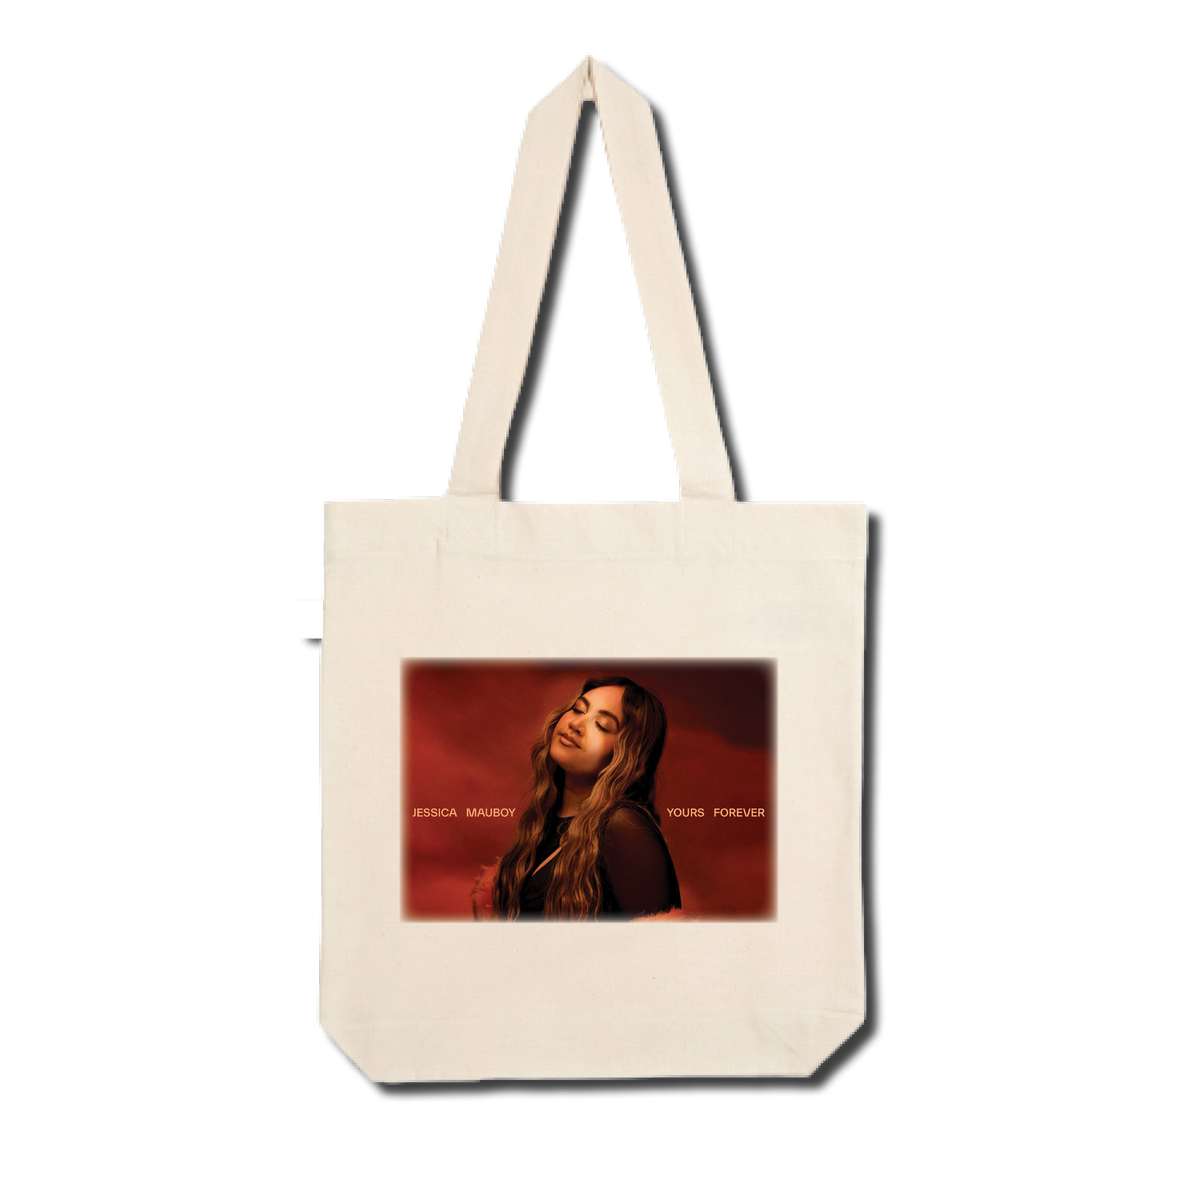 JESSICA MAUBOY Yours Forever LP VINYL PLUS TOTE BAG